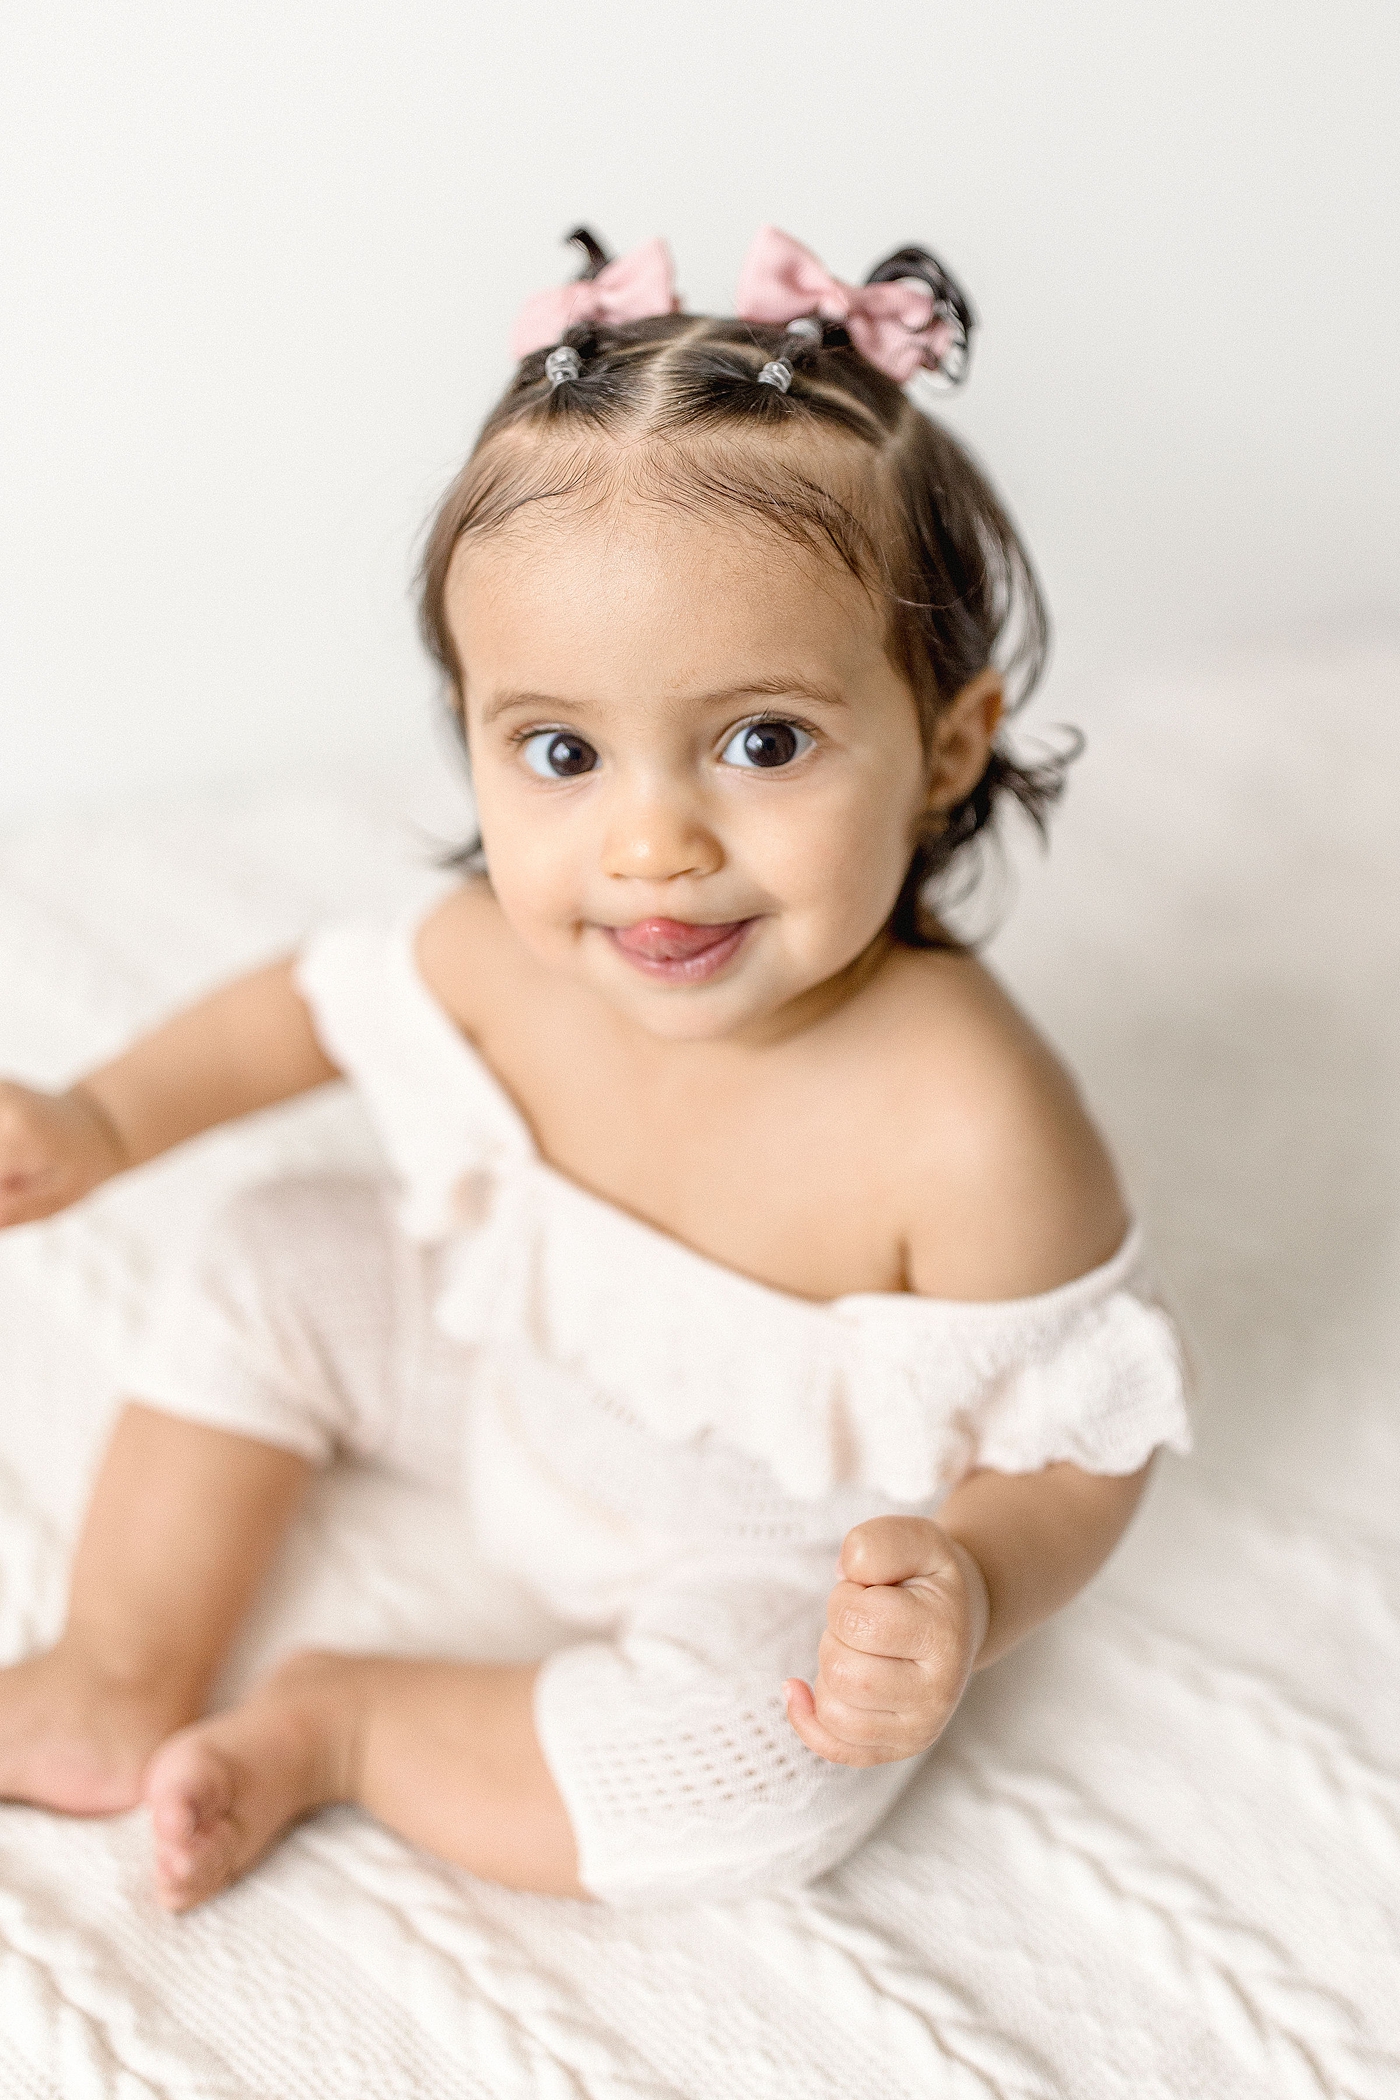 Six month sitter session of baby girl in pigtails and white romper during her baby photography miami session. Photo by Ivanna Vidal Photography.